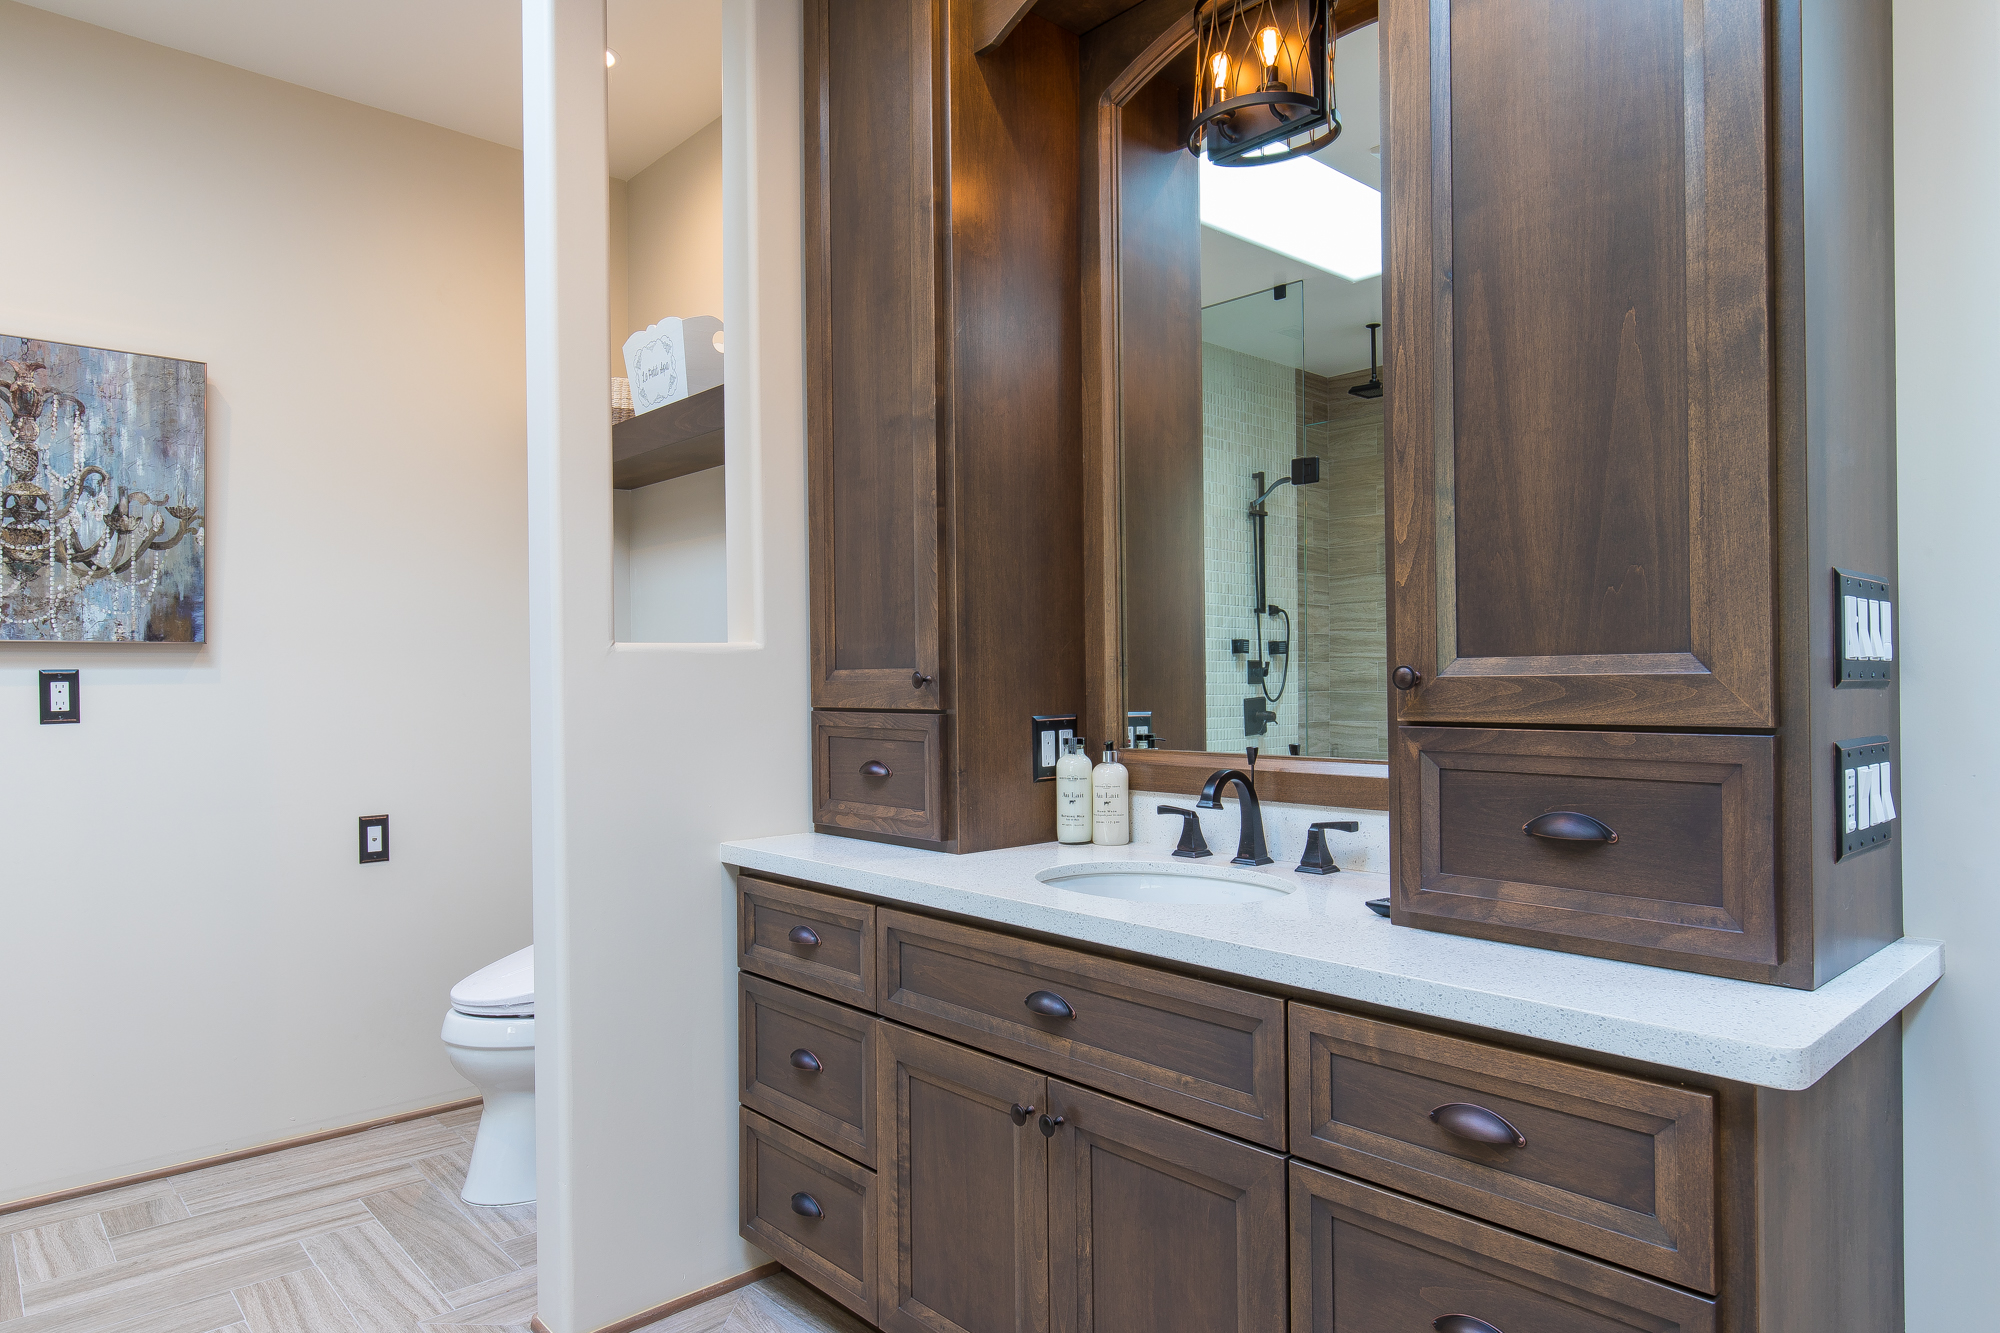  Two separate custom made vanities with countertop cabinet towers and pull out hampers provide ample storage for toiletries 